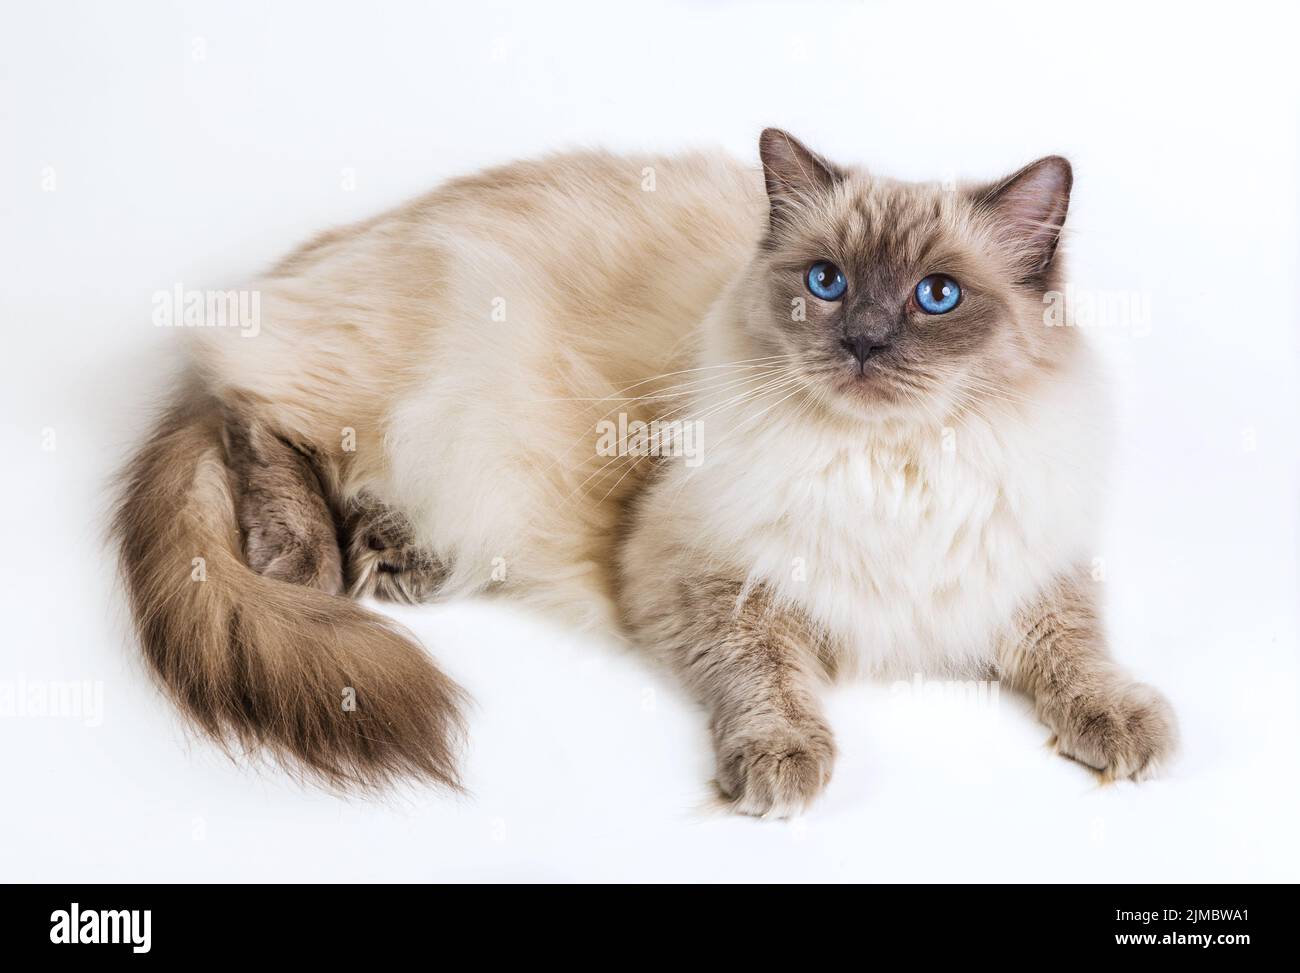 Fluffy cat ragdoll on a white background Stock Photo